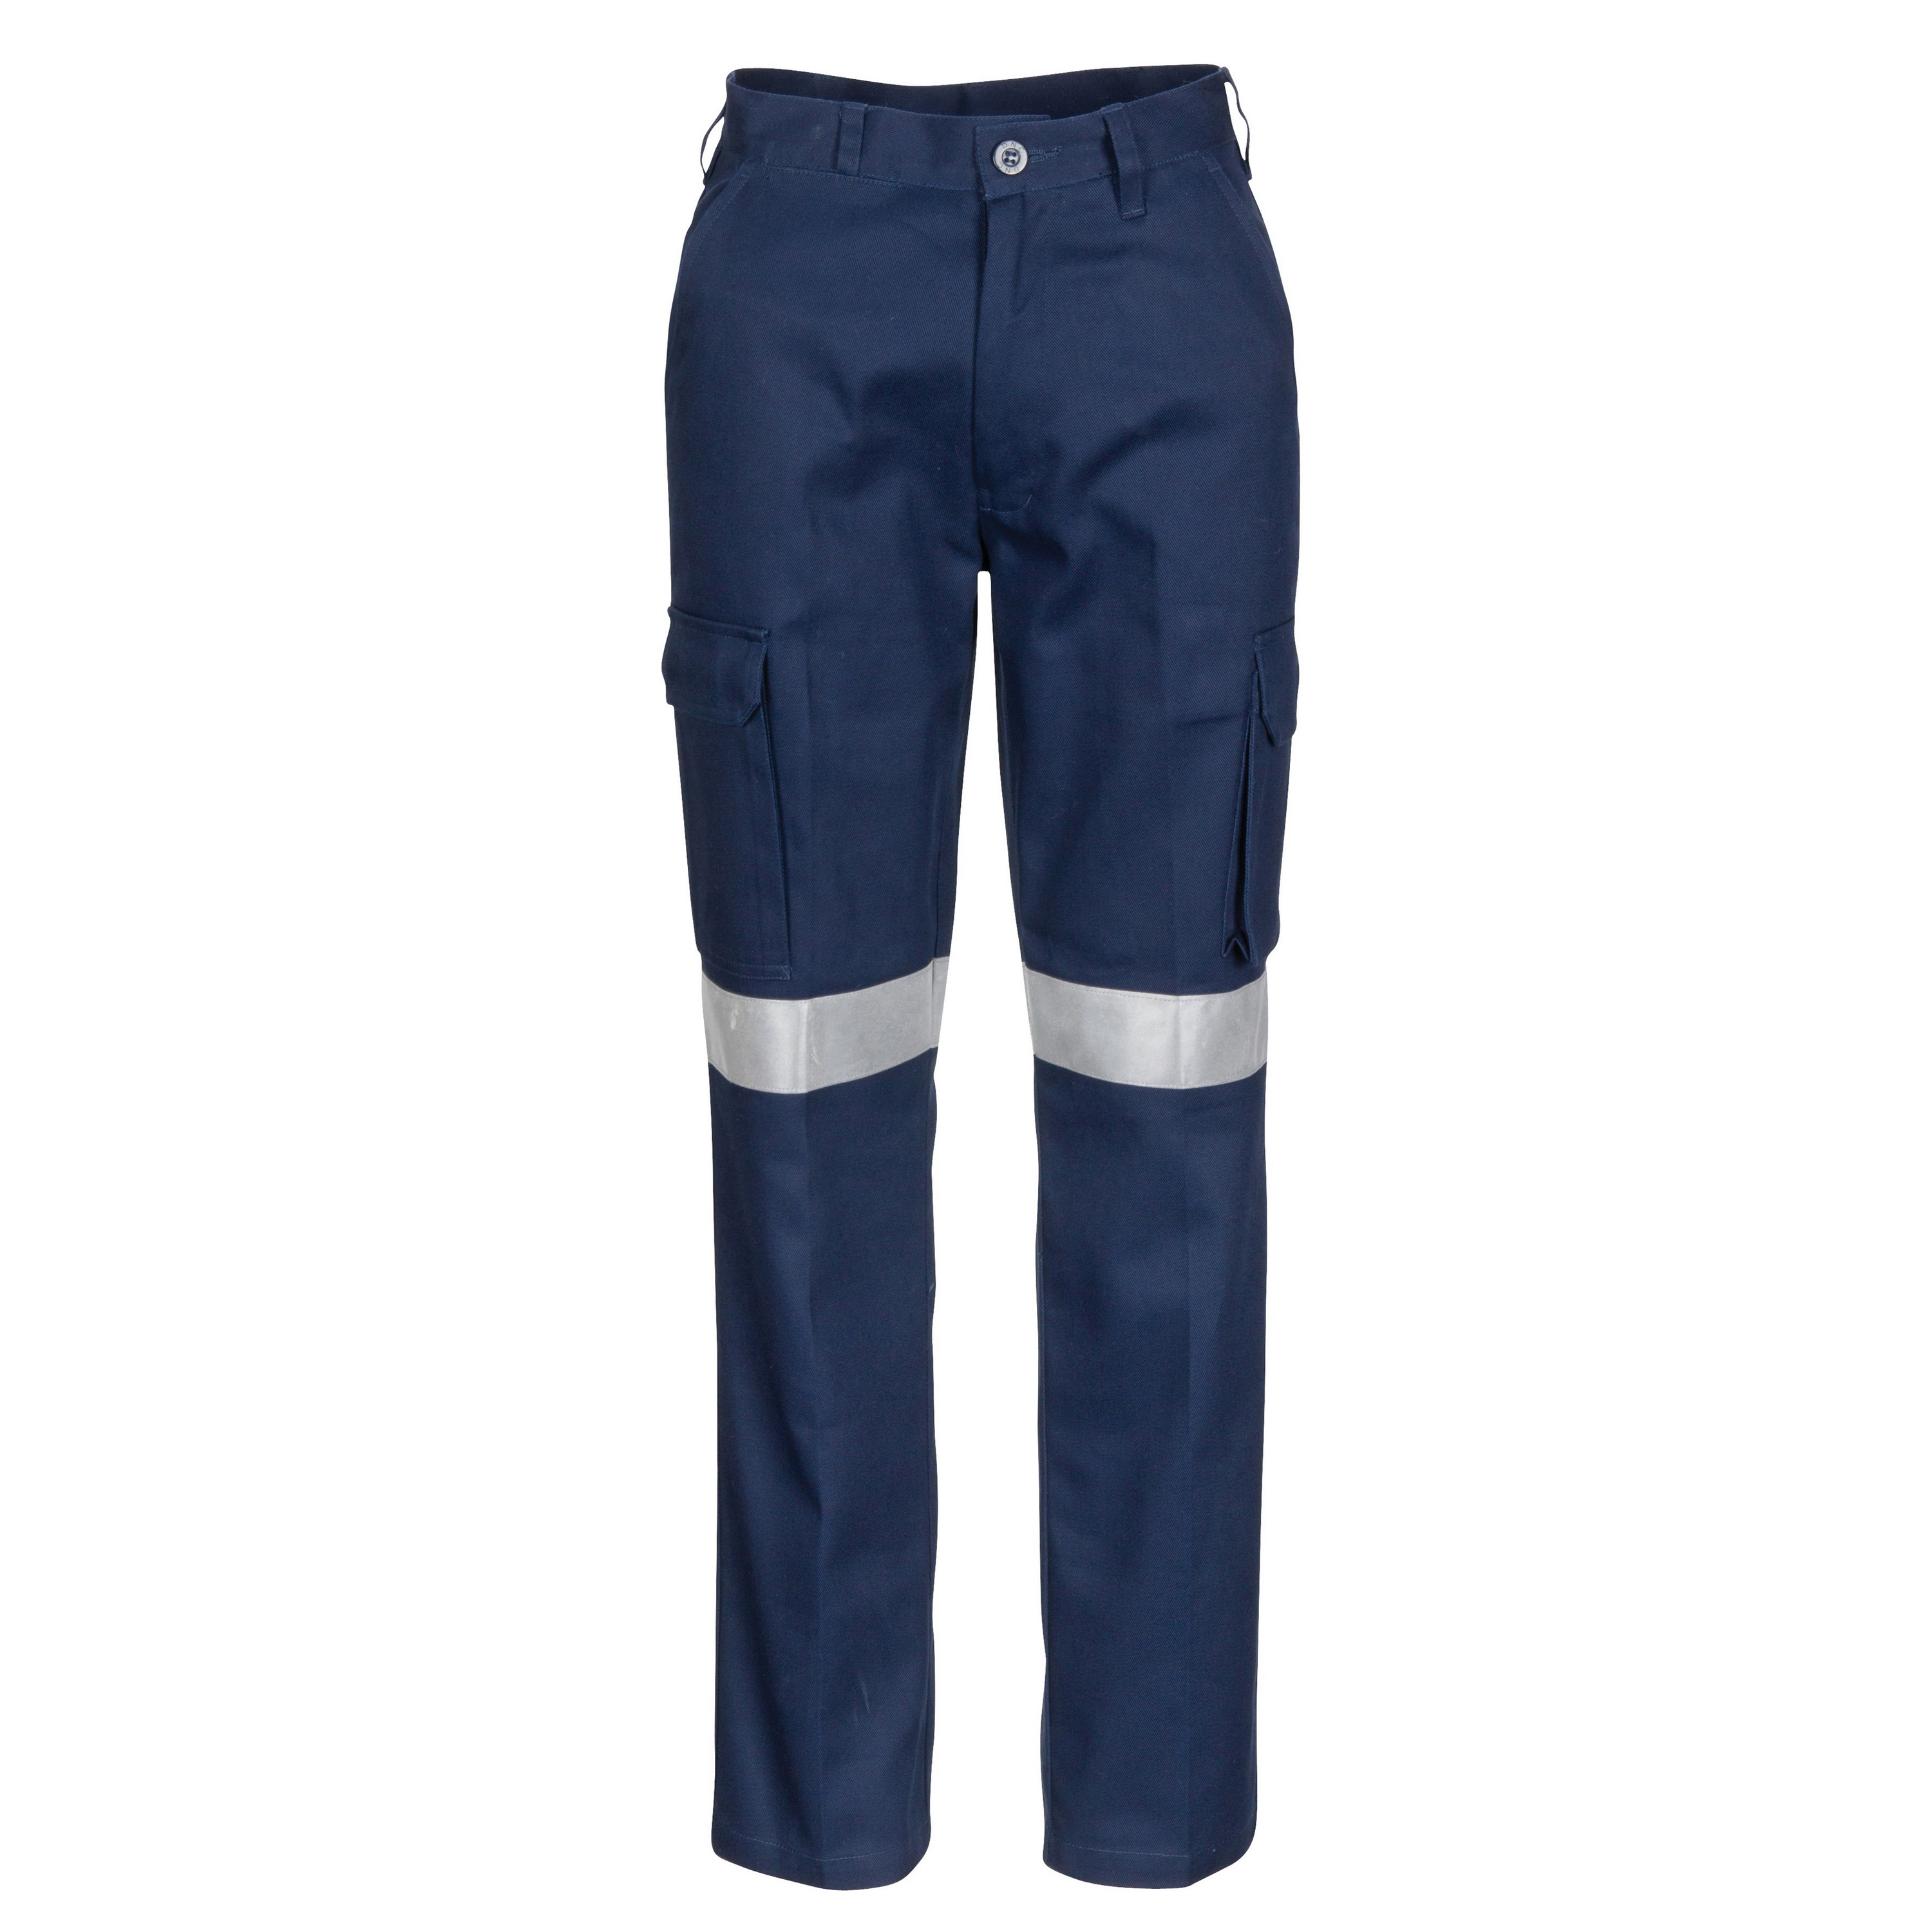 DNC Ladies Cotton Drill Cargo Pants with 3M Reflective Tape-DNC